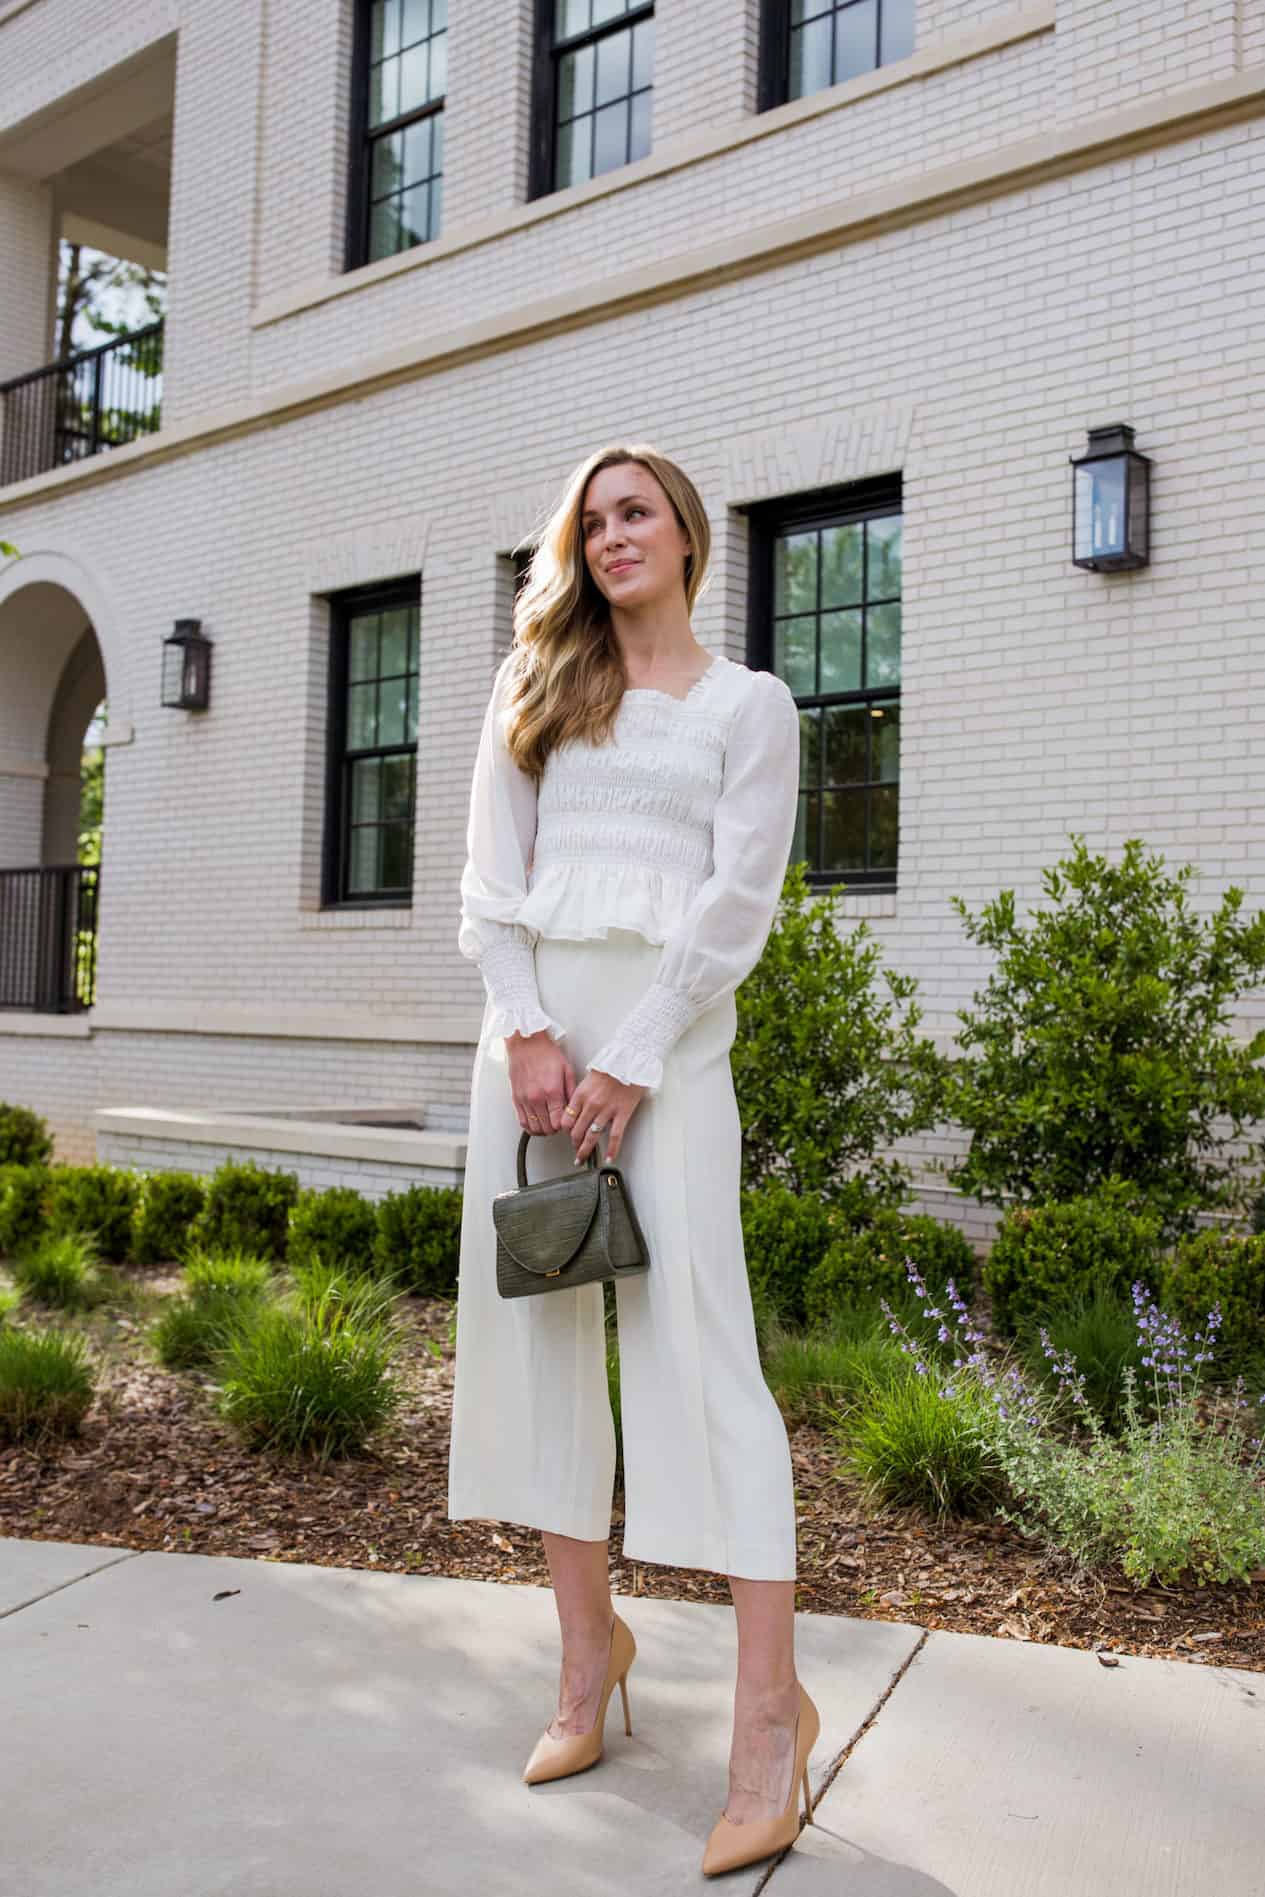 a woman standing on a sidewalk with greenery in the background wearing a white blouse and wide leg cream trousers and heels 